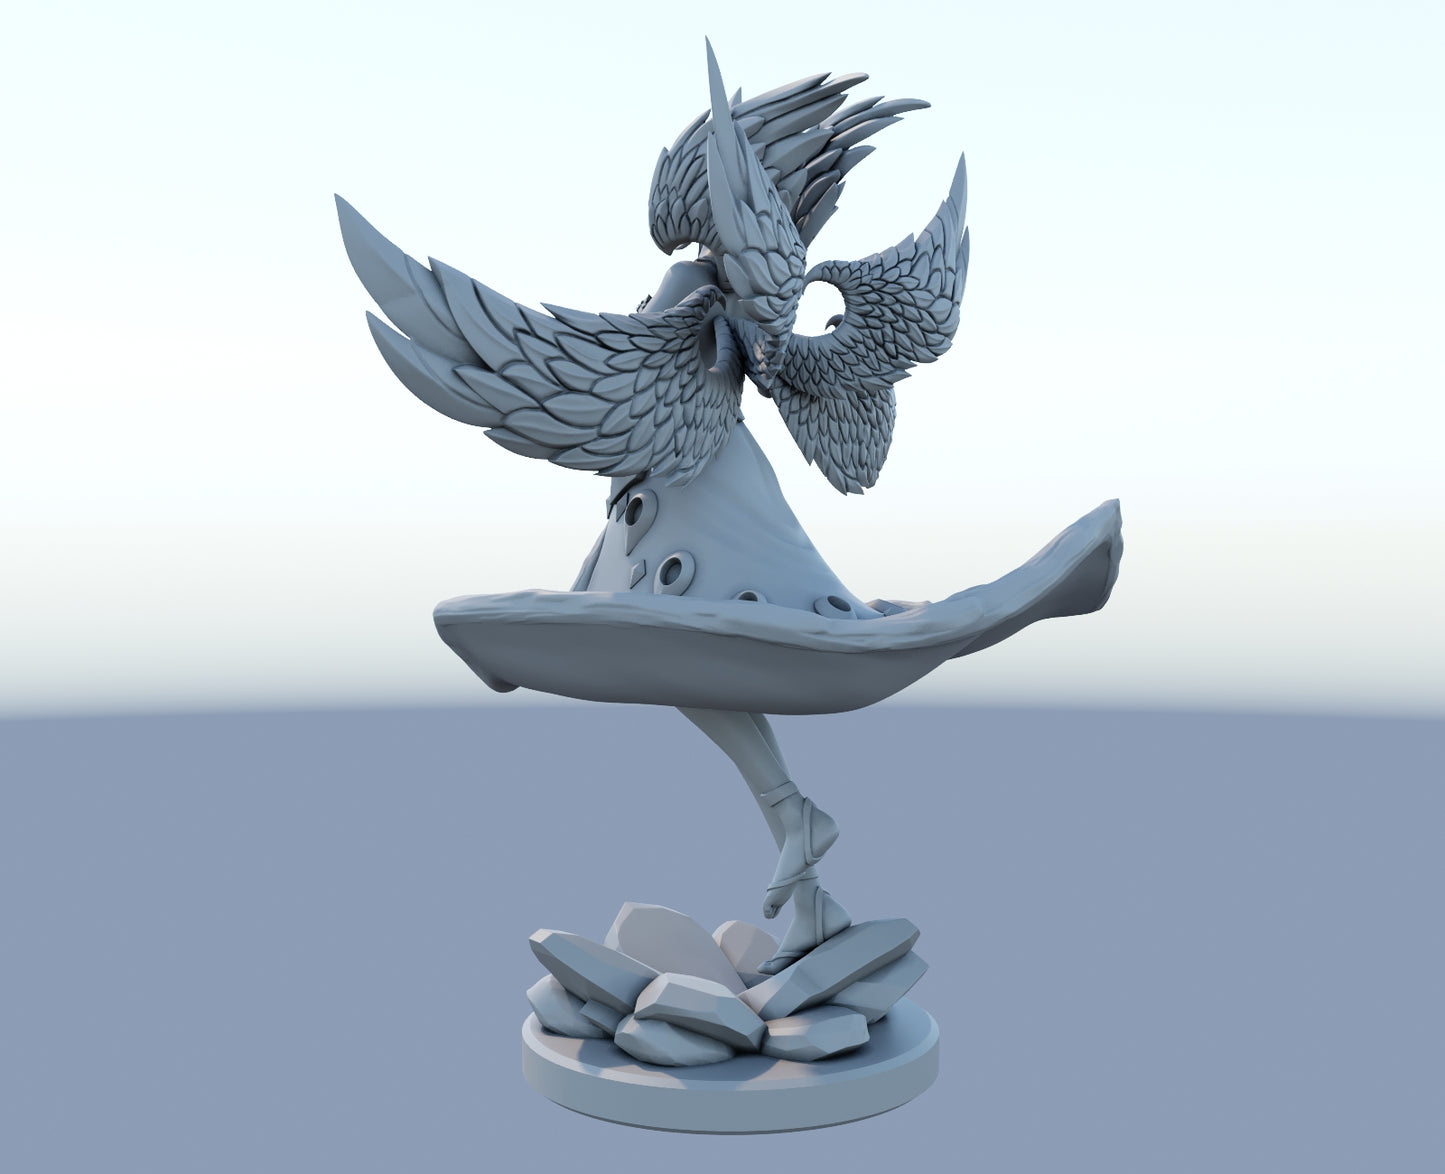 Morgana 3D-printed League of Legends champion figure. Decorate your gaming setup or home with your favorite League of Legends champion! Choose between the unpainted version, perfect for you to paint yourself, or the hand-painted version by a professional painter. Order your figure today!